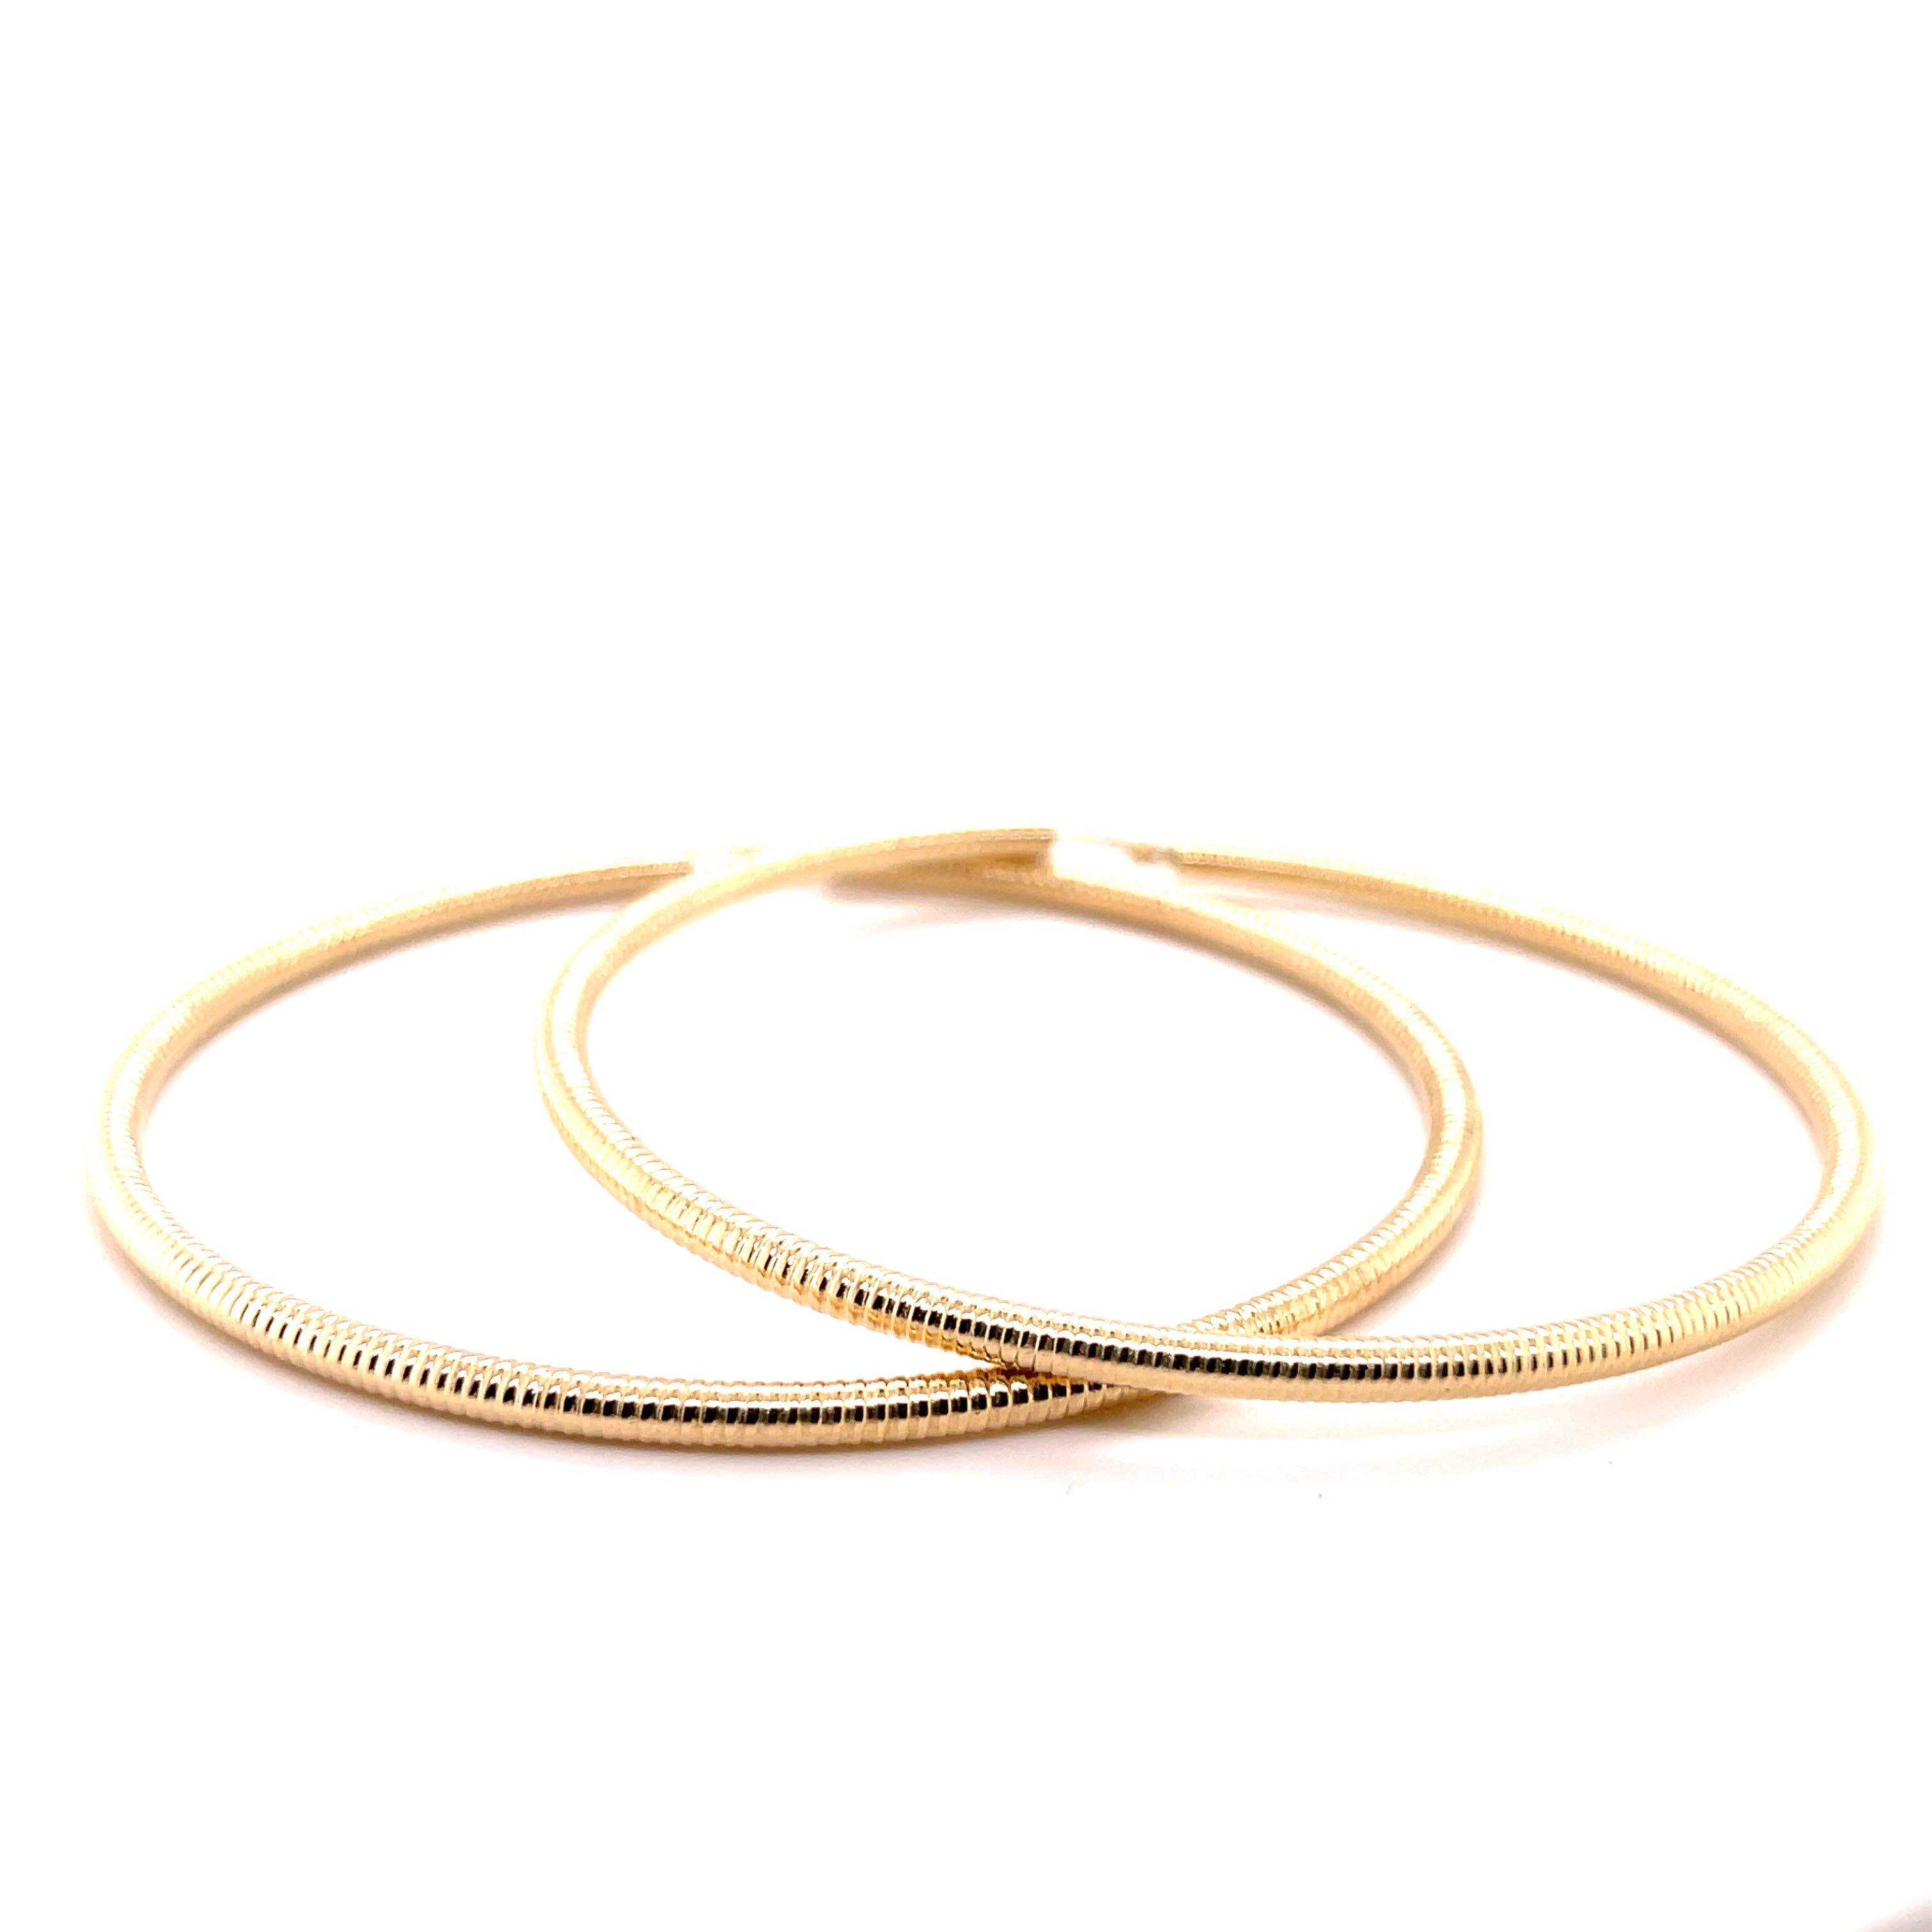 14K GOLD LARGE TEXTURED HOOPS